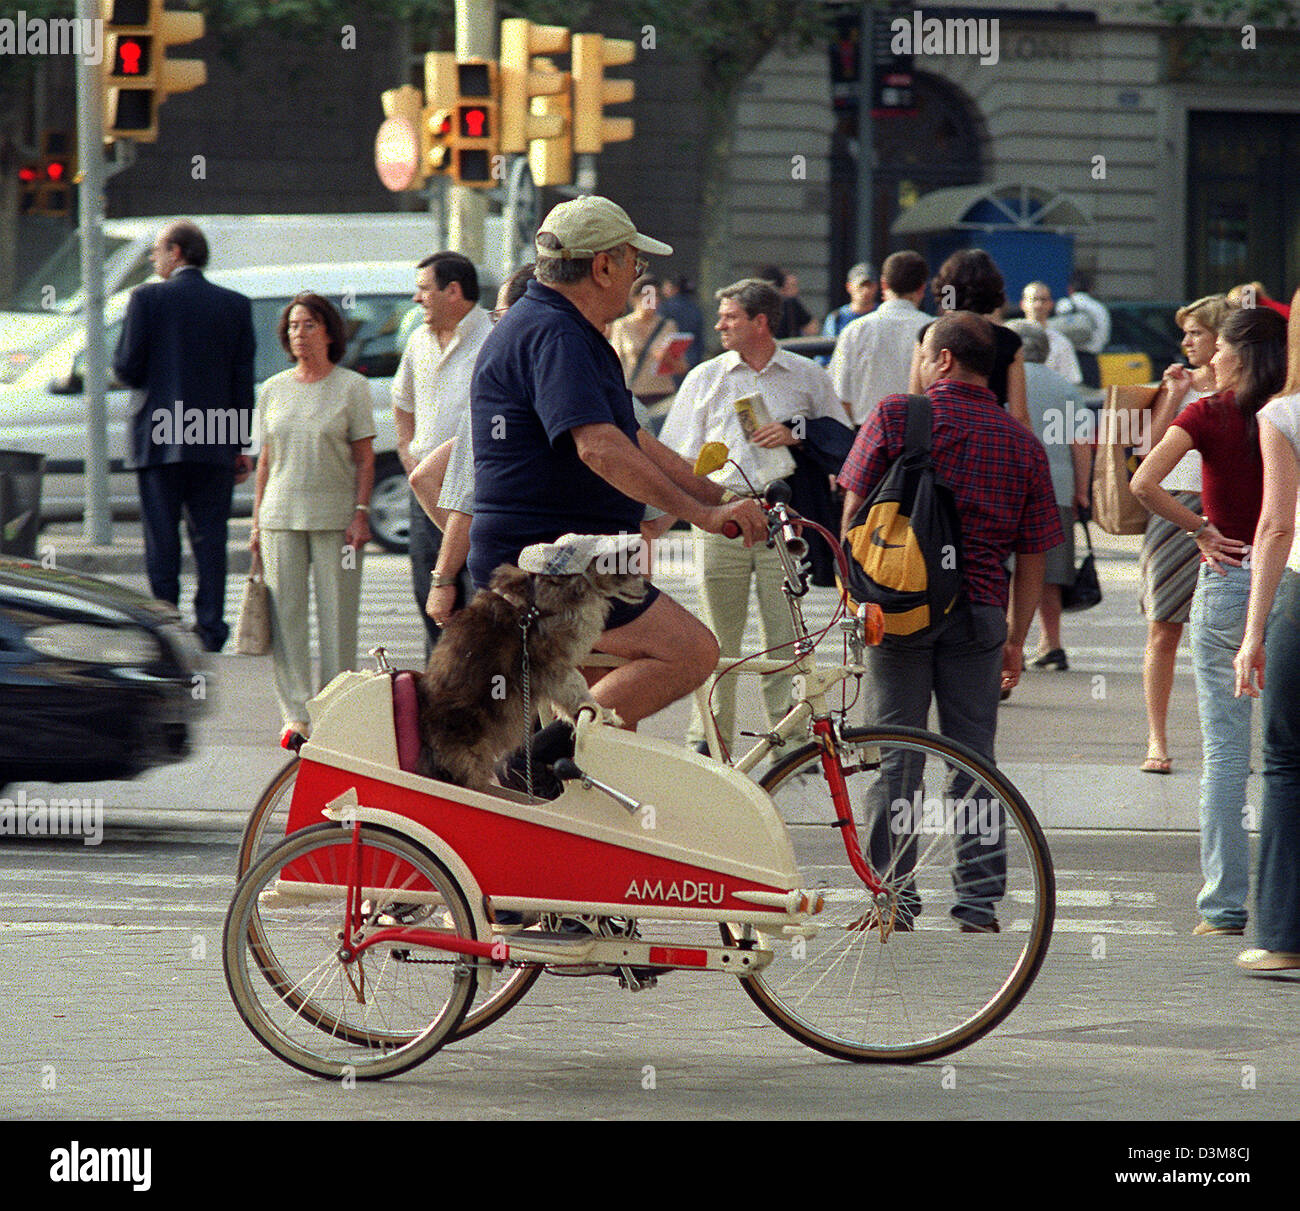 (dpa file) - A dog takes a ride in a bicycle sidecar at the Passeig de Gracia in Barcelona, Spain, 19 June 2002. Dogs are part of Barcelona's everyday cityscape. Photo: Thorsten Lang Stock Photo